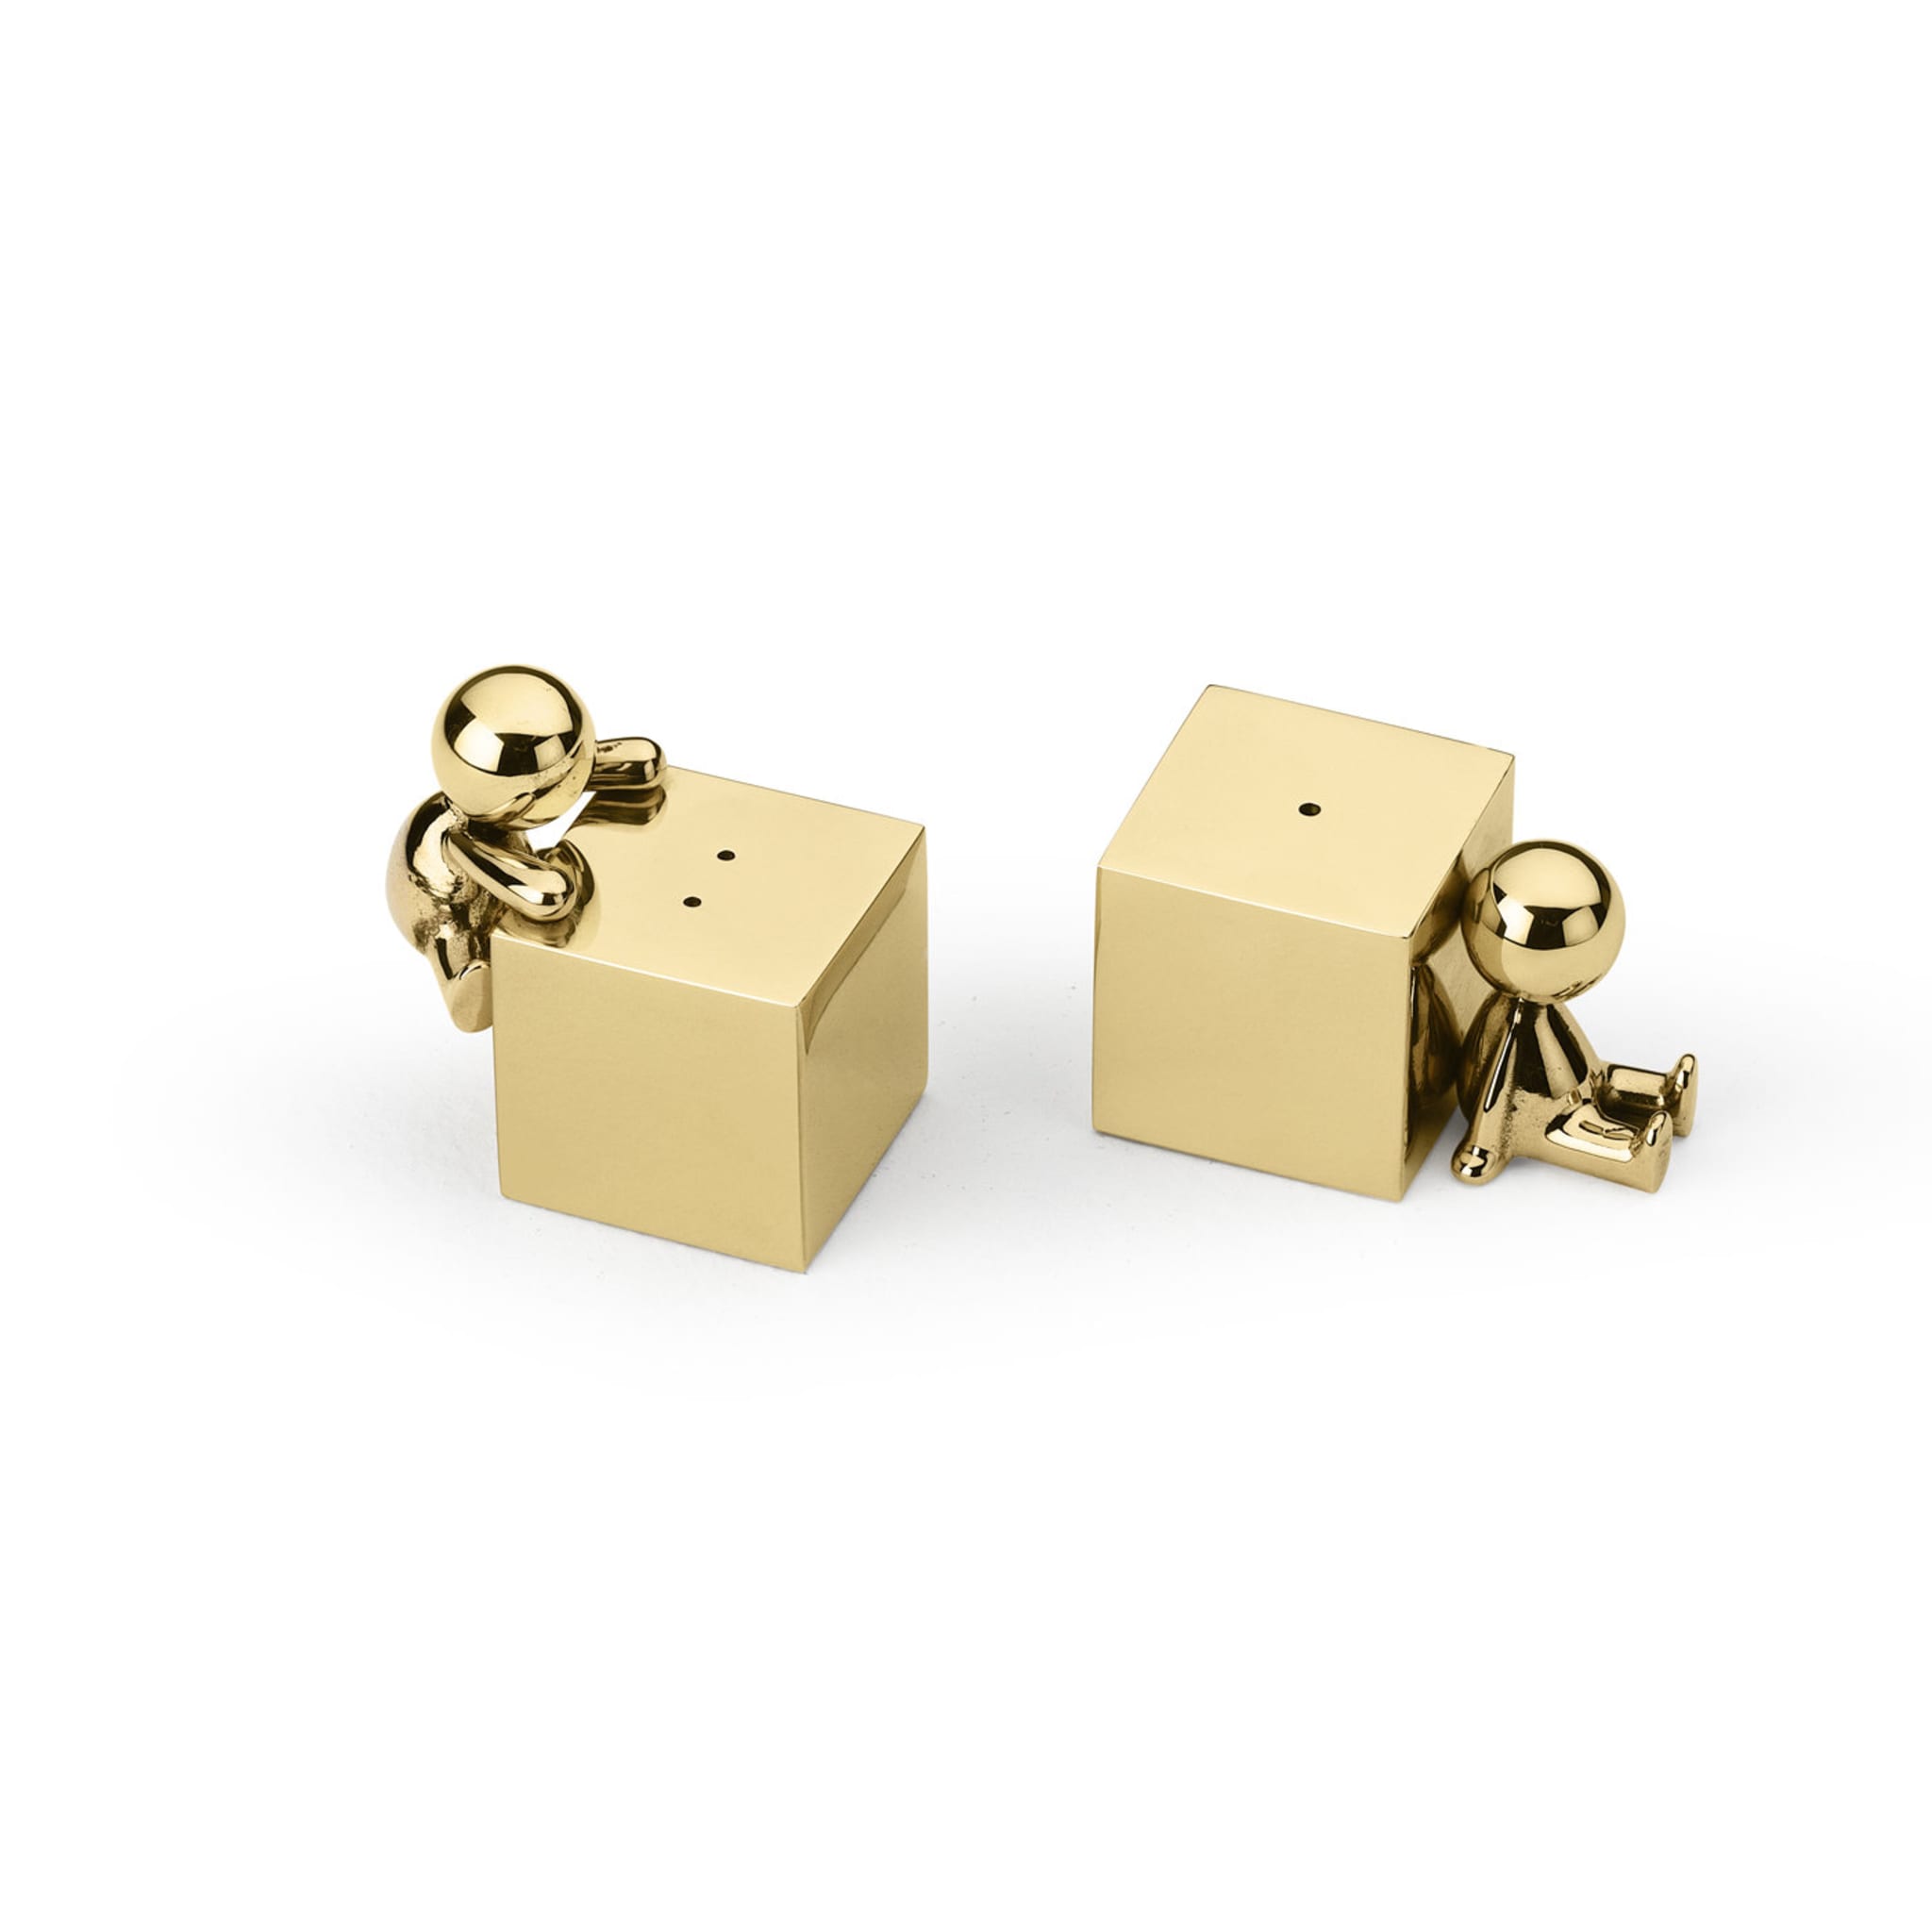 Omini Salt and Pepper Shakers in Polished Brass Finish - Alternative view 1